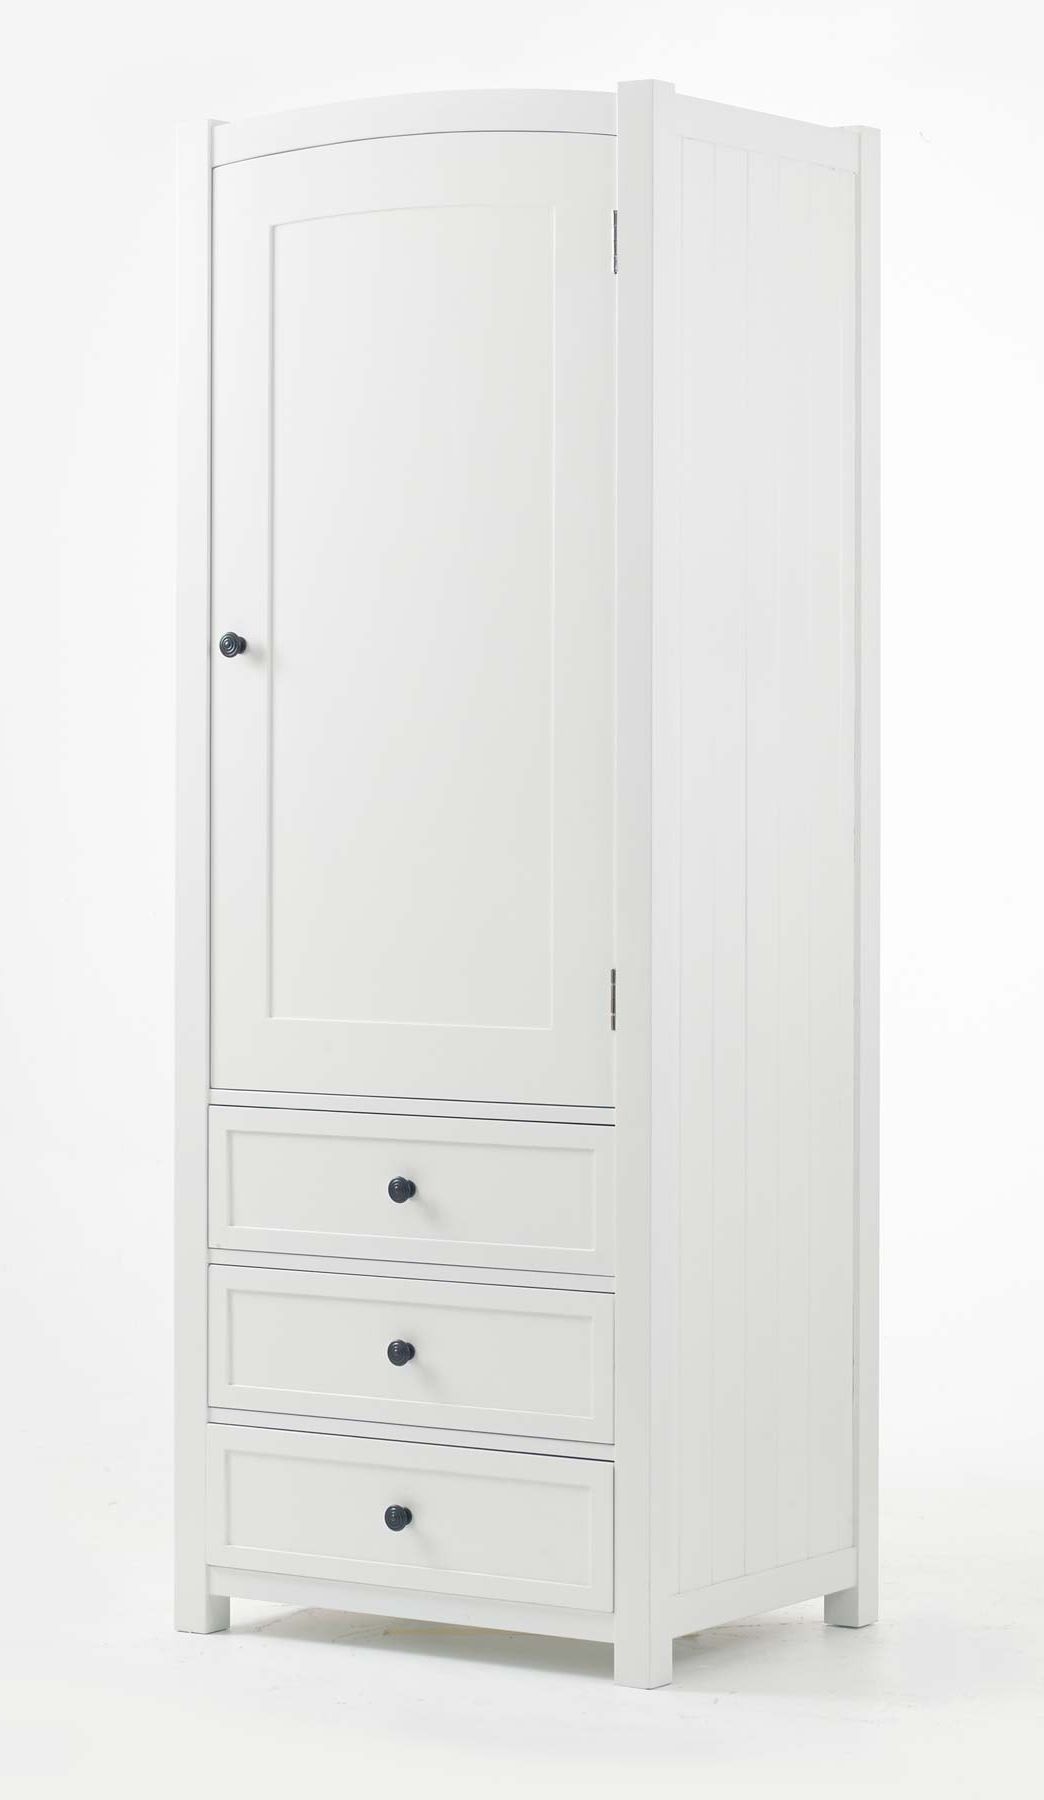 Preferred Children's White Solid Wood Single Wardrobe With Drawers With Regard To Single White Wardrobes (View 3 of 15)